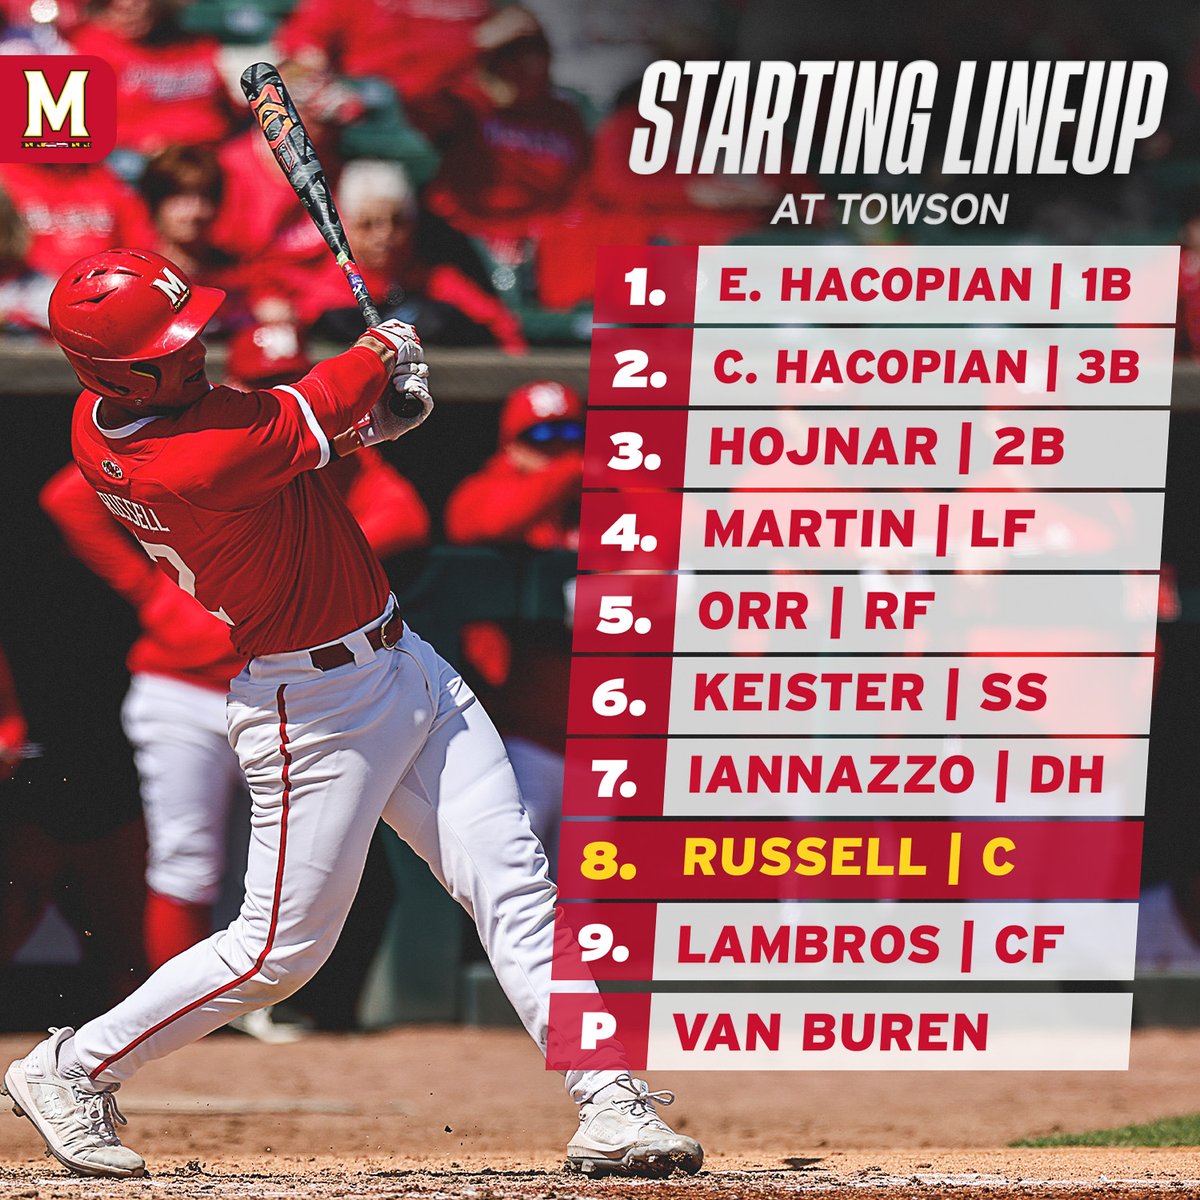 The starting lineup for the Terps against Towson

📺 go.umd.edu/3JCeGBP 
🎧 go.umd.edu/mbn 
📊 go.umd.edu/4aUXuDj

#DirtyTerps